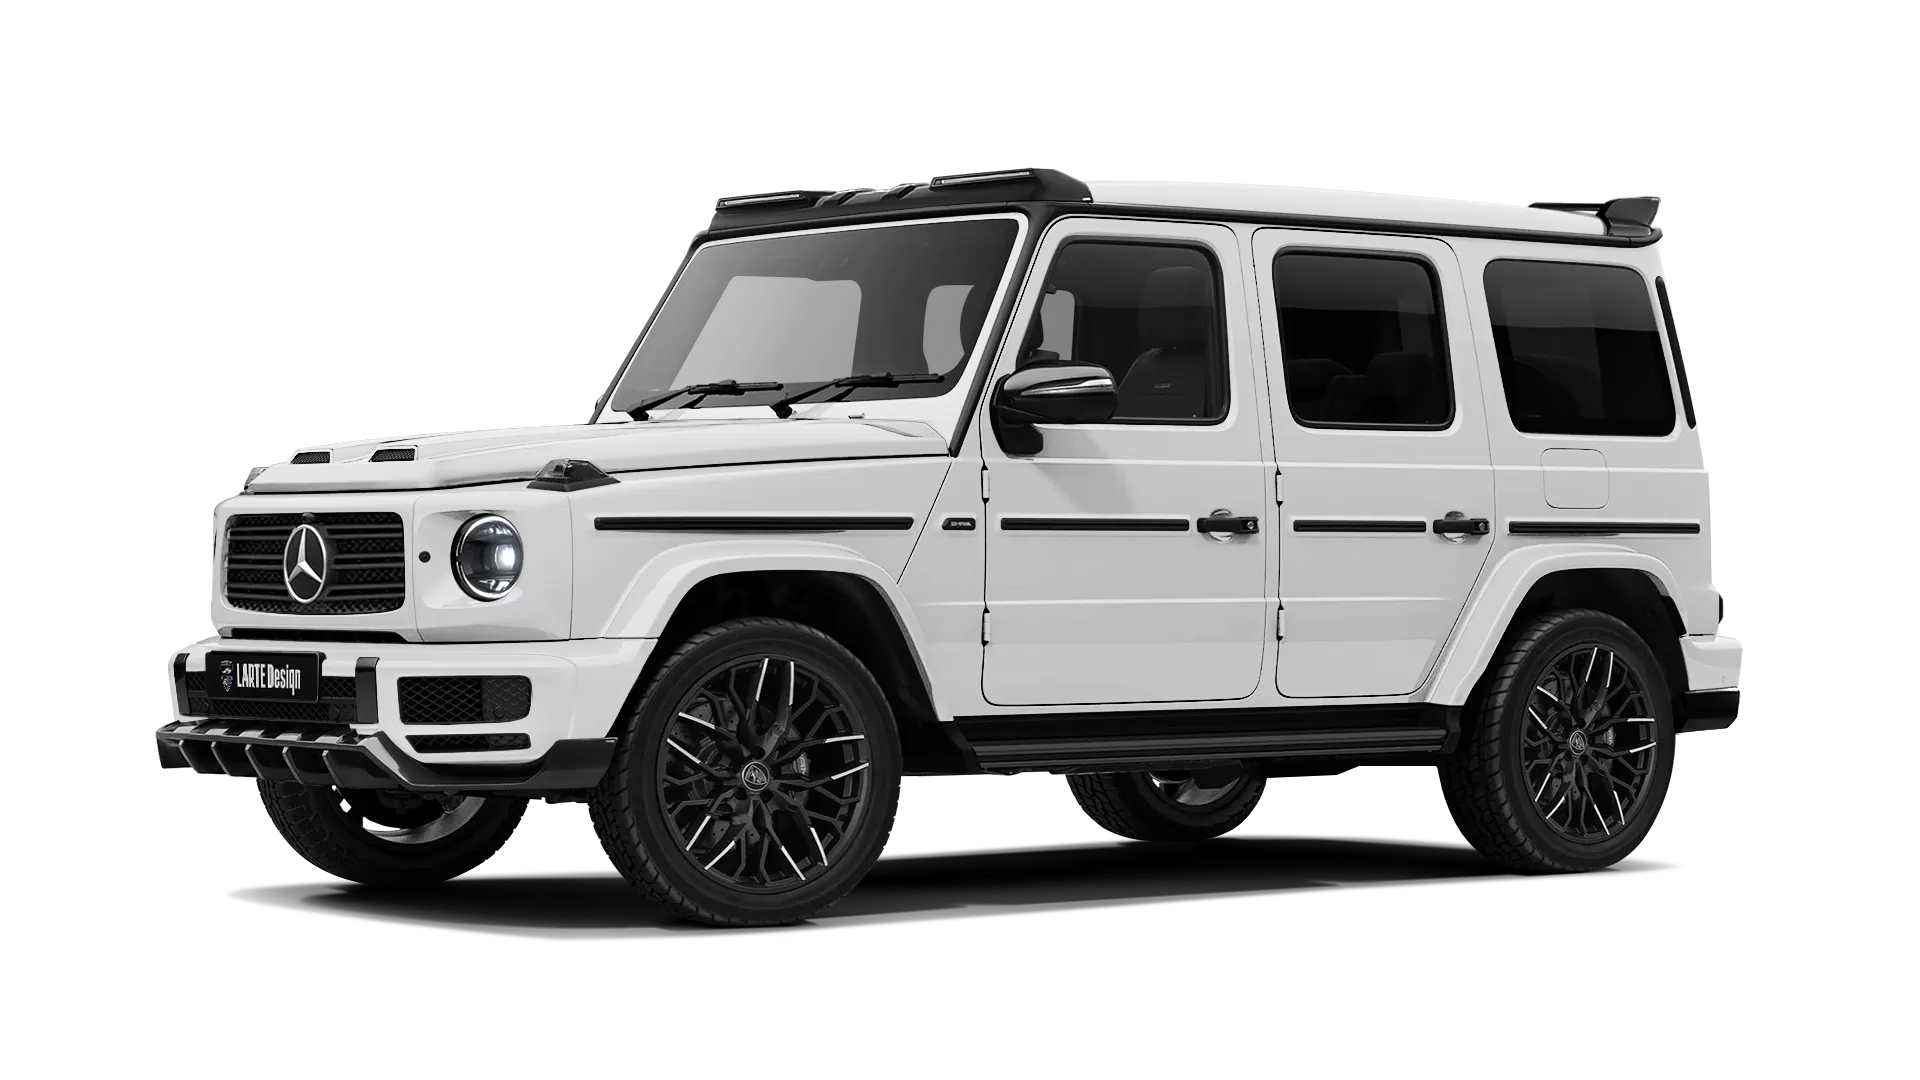 Mercedes G class W463 with painted body kit: front view shown in Polar White